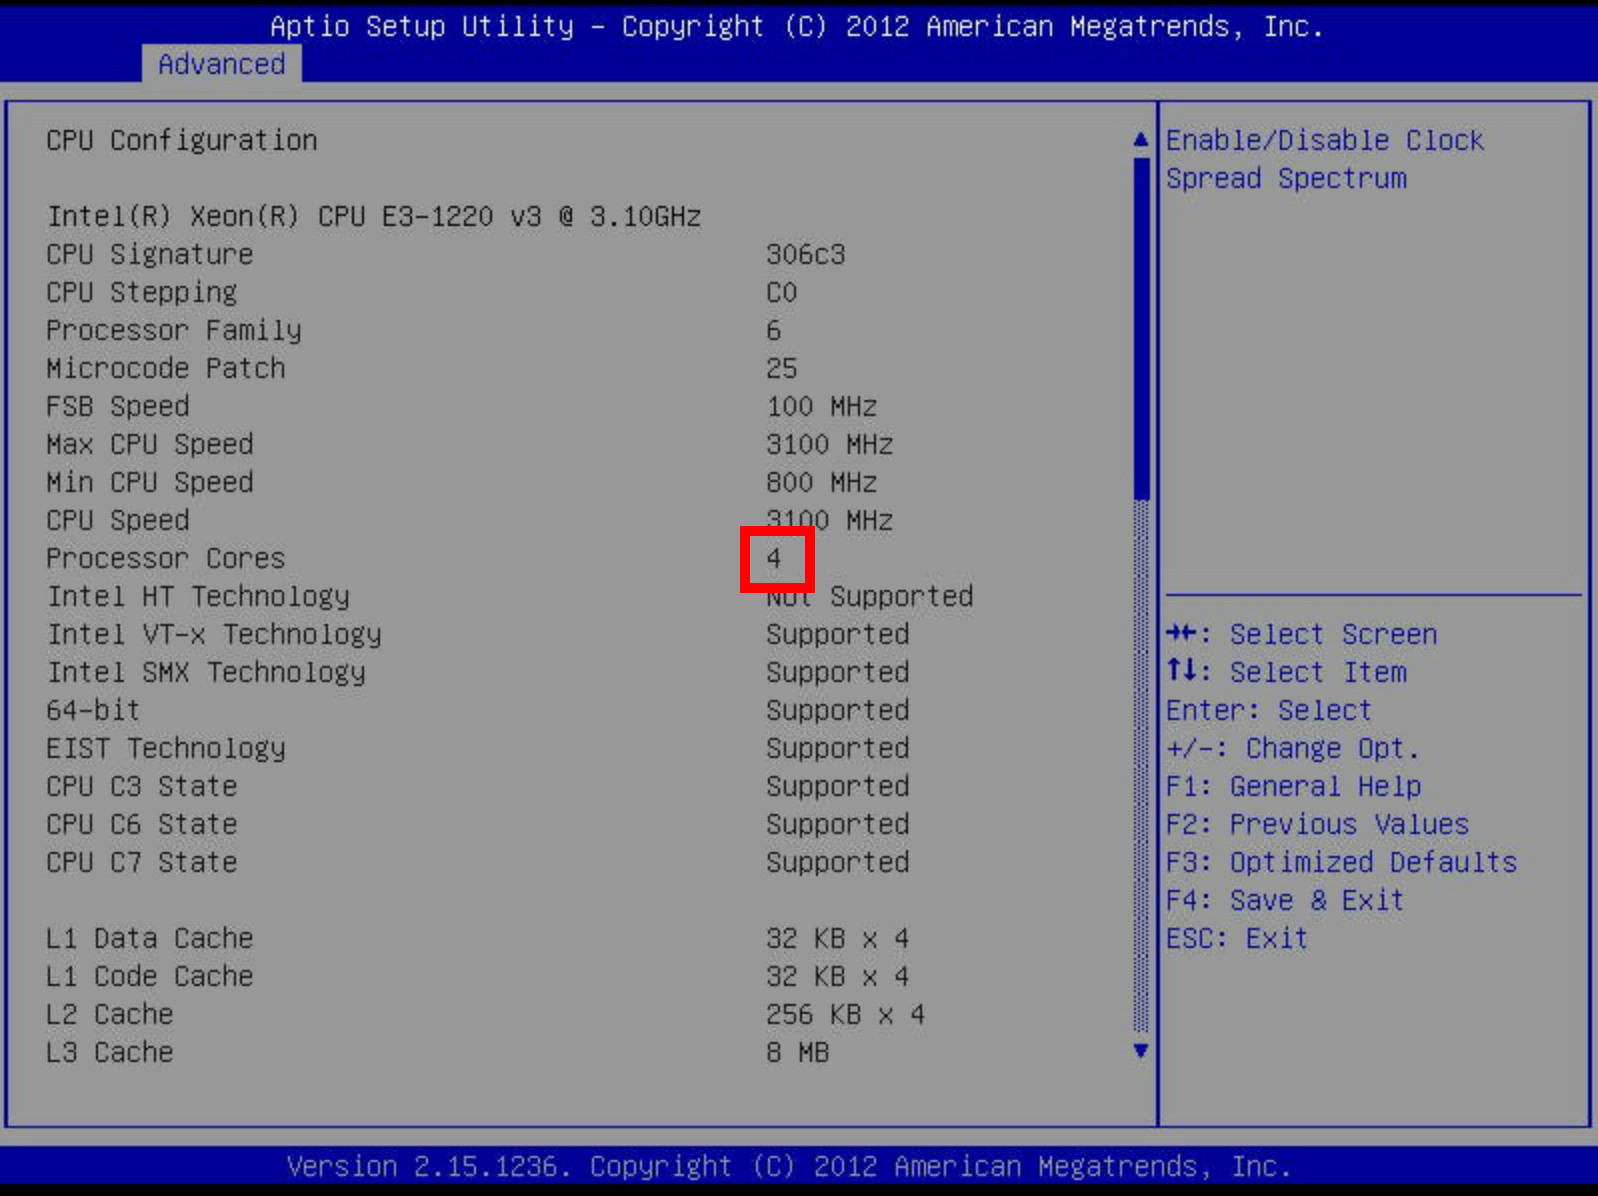 Screenshot of the Supermicro BIOS, showing that the CPU is operating normally.